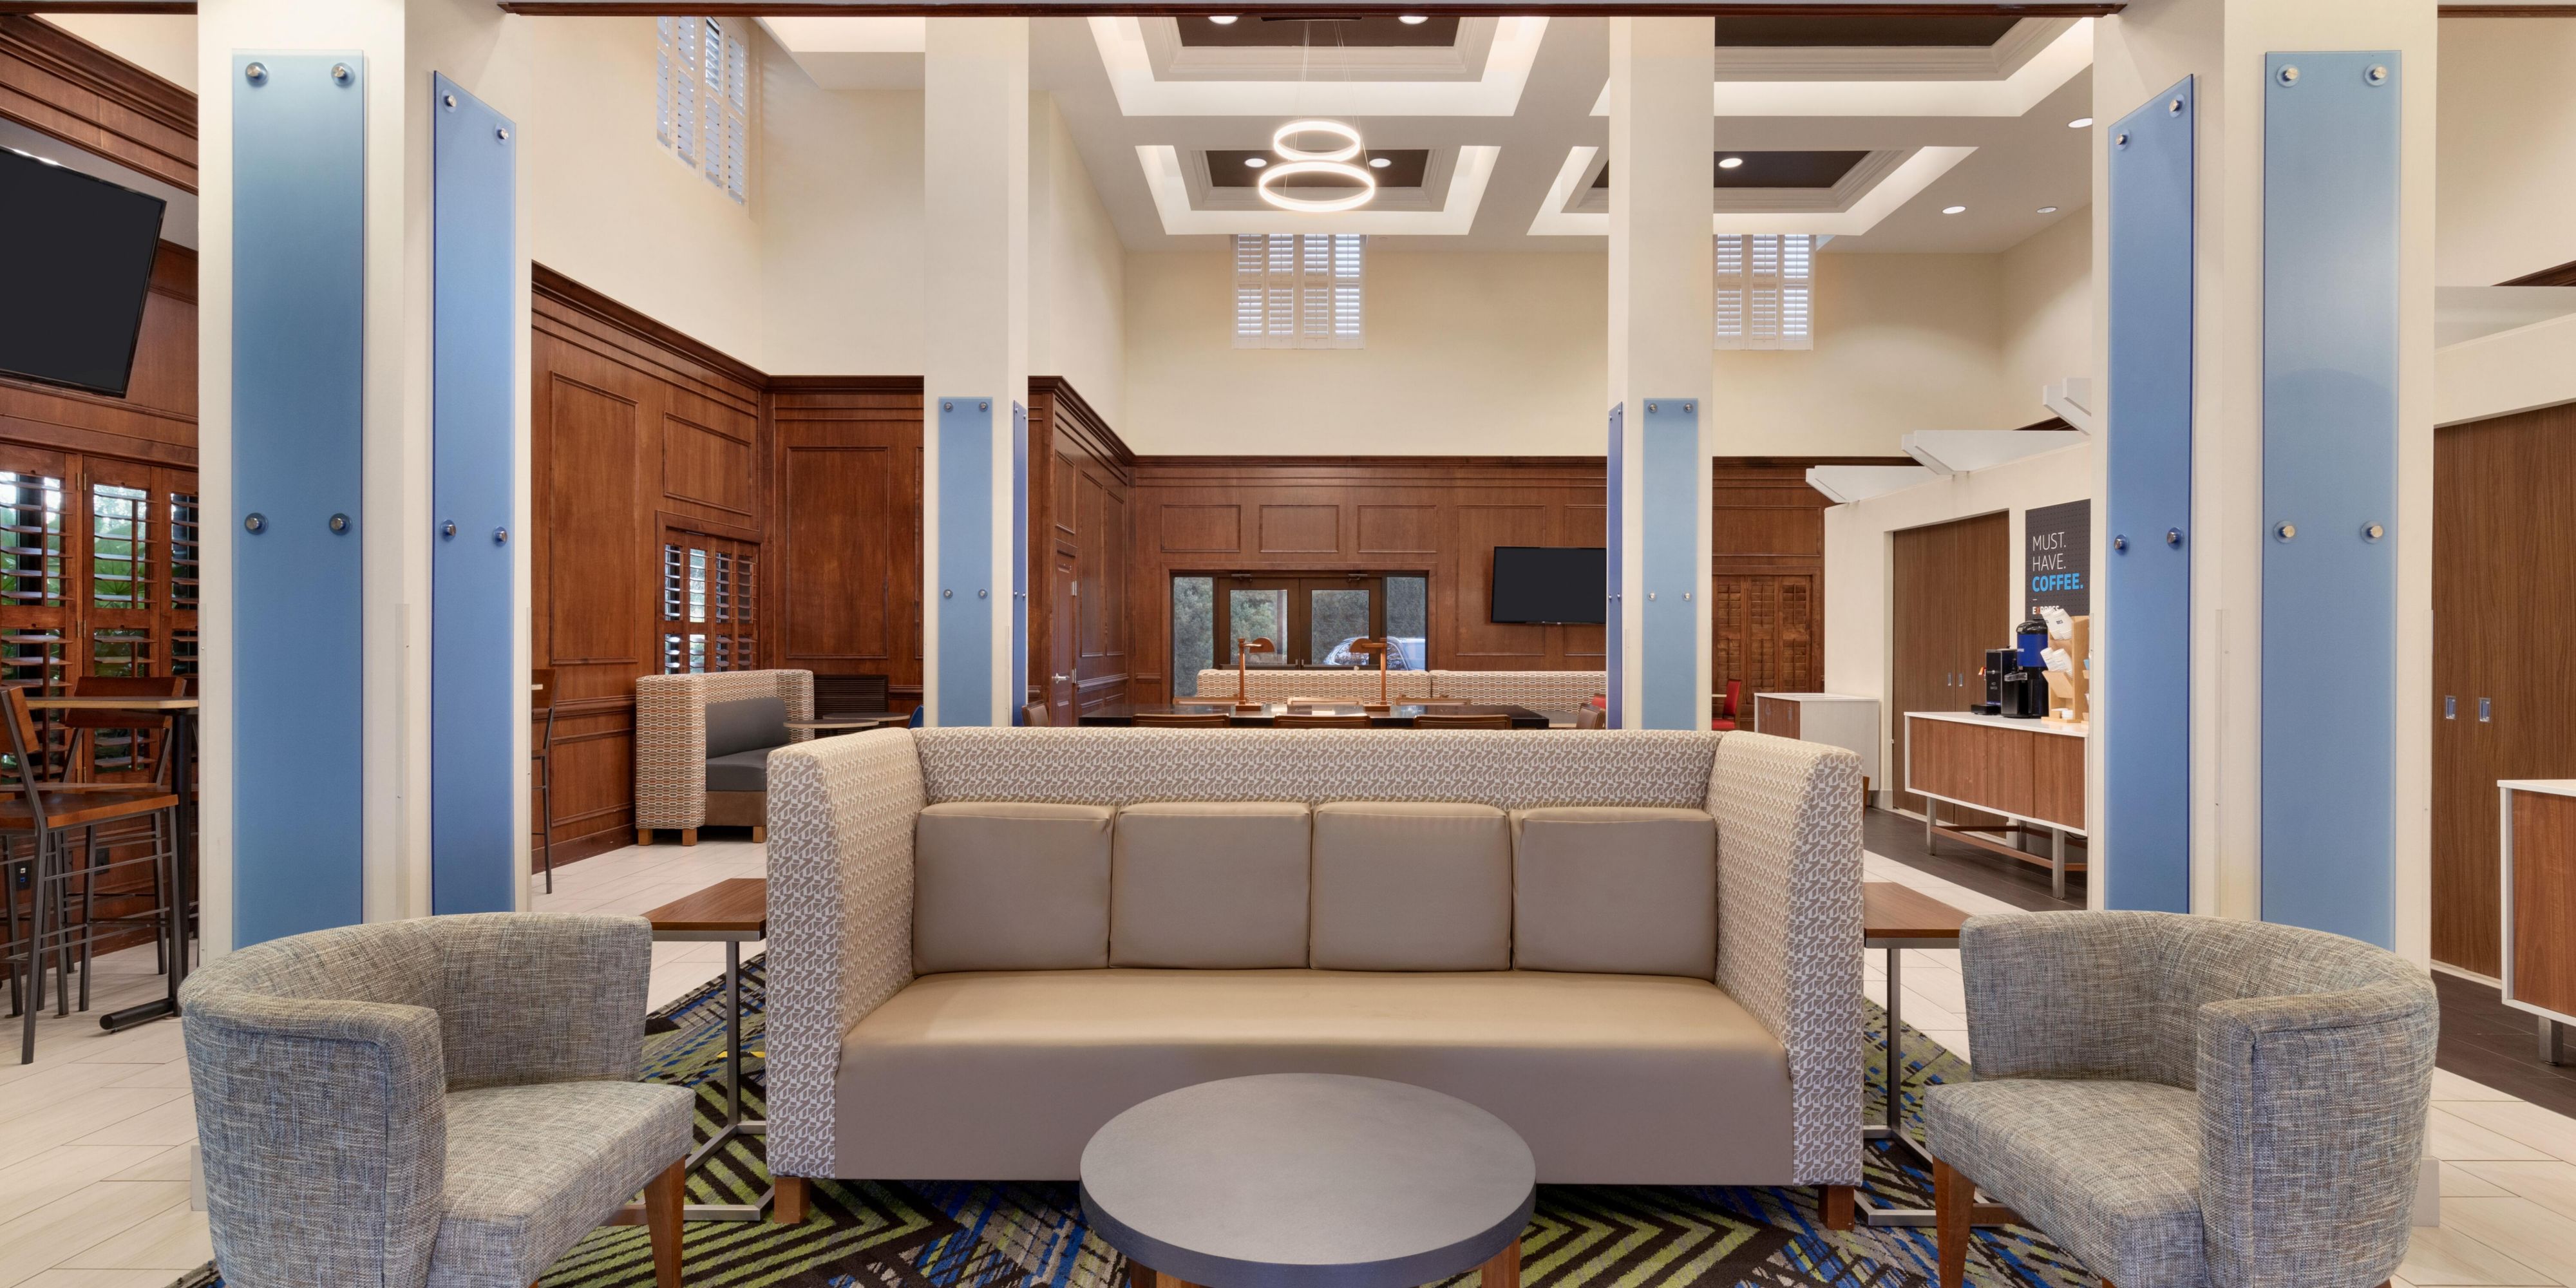 Our property has been recently renovated to provide a fresh experience with fully updated guestrooms, bathrooms, pool, Fitness Center, breakfast area, lobby, and landscaping. We look forward to welcoming you on your next trip to the Charleston area!